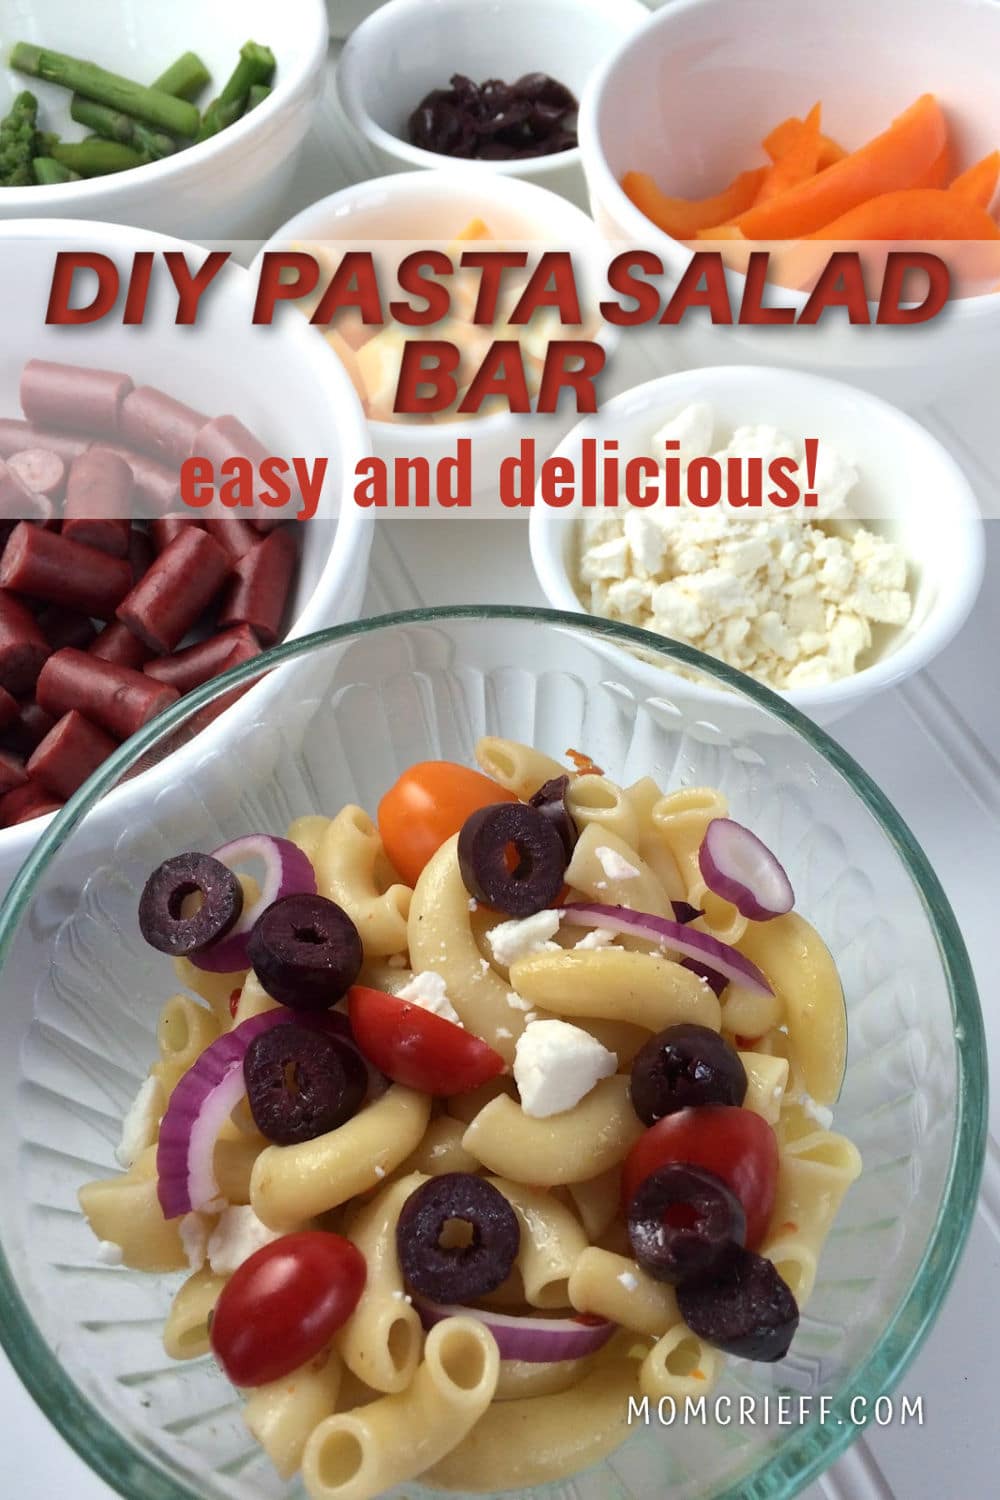 Make a tasty, easy pasta salad for your Memorial Day Weekend